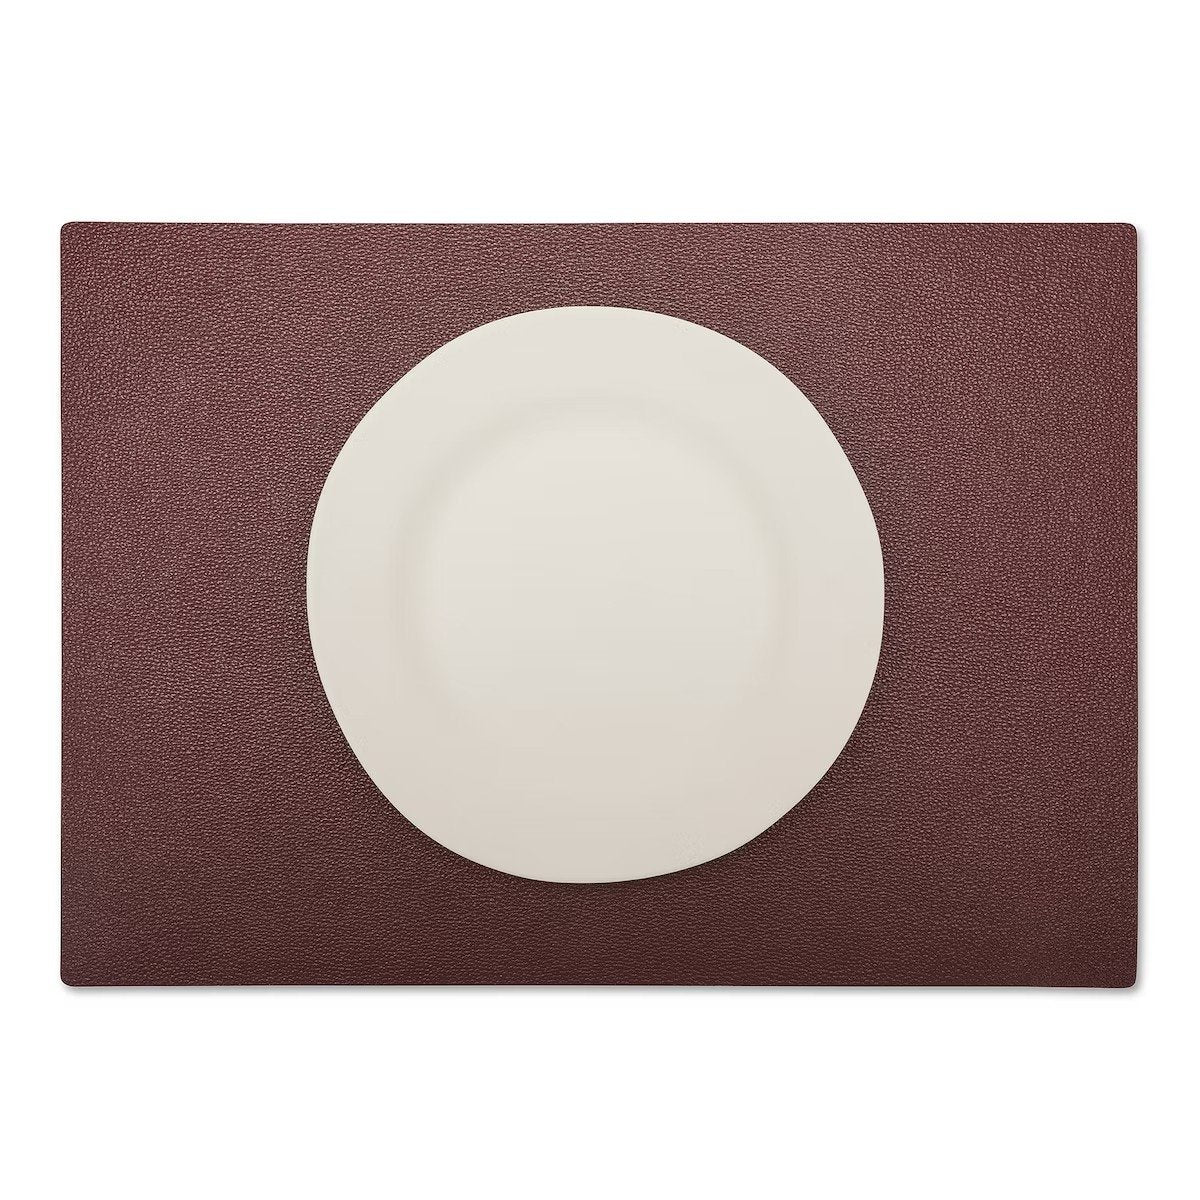 A large rectangular textured washable paper placemat in dark red is shown under a white plate.